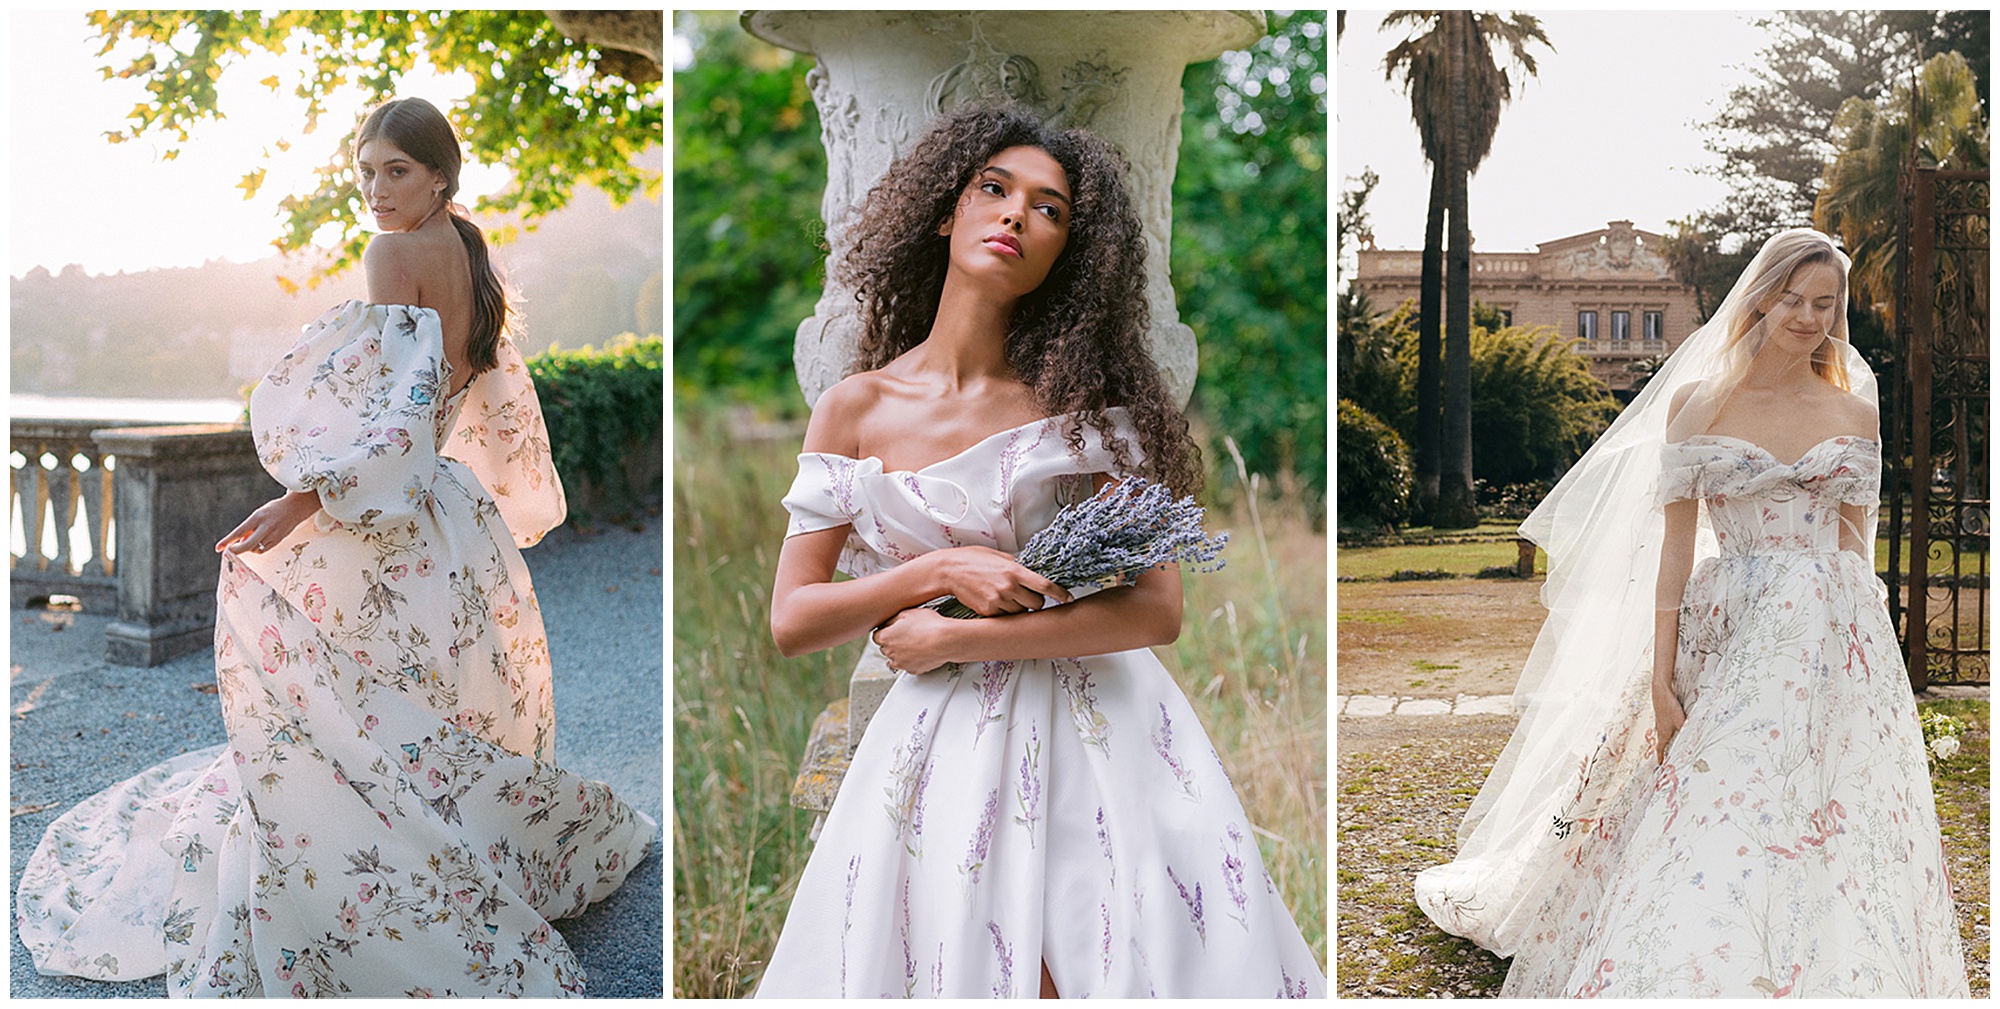 Monique Lhuillier covers a number of bridal fashion trends, and adds pops of color to her gorgeous wedding gowns